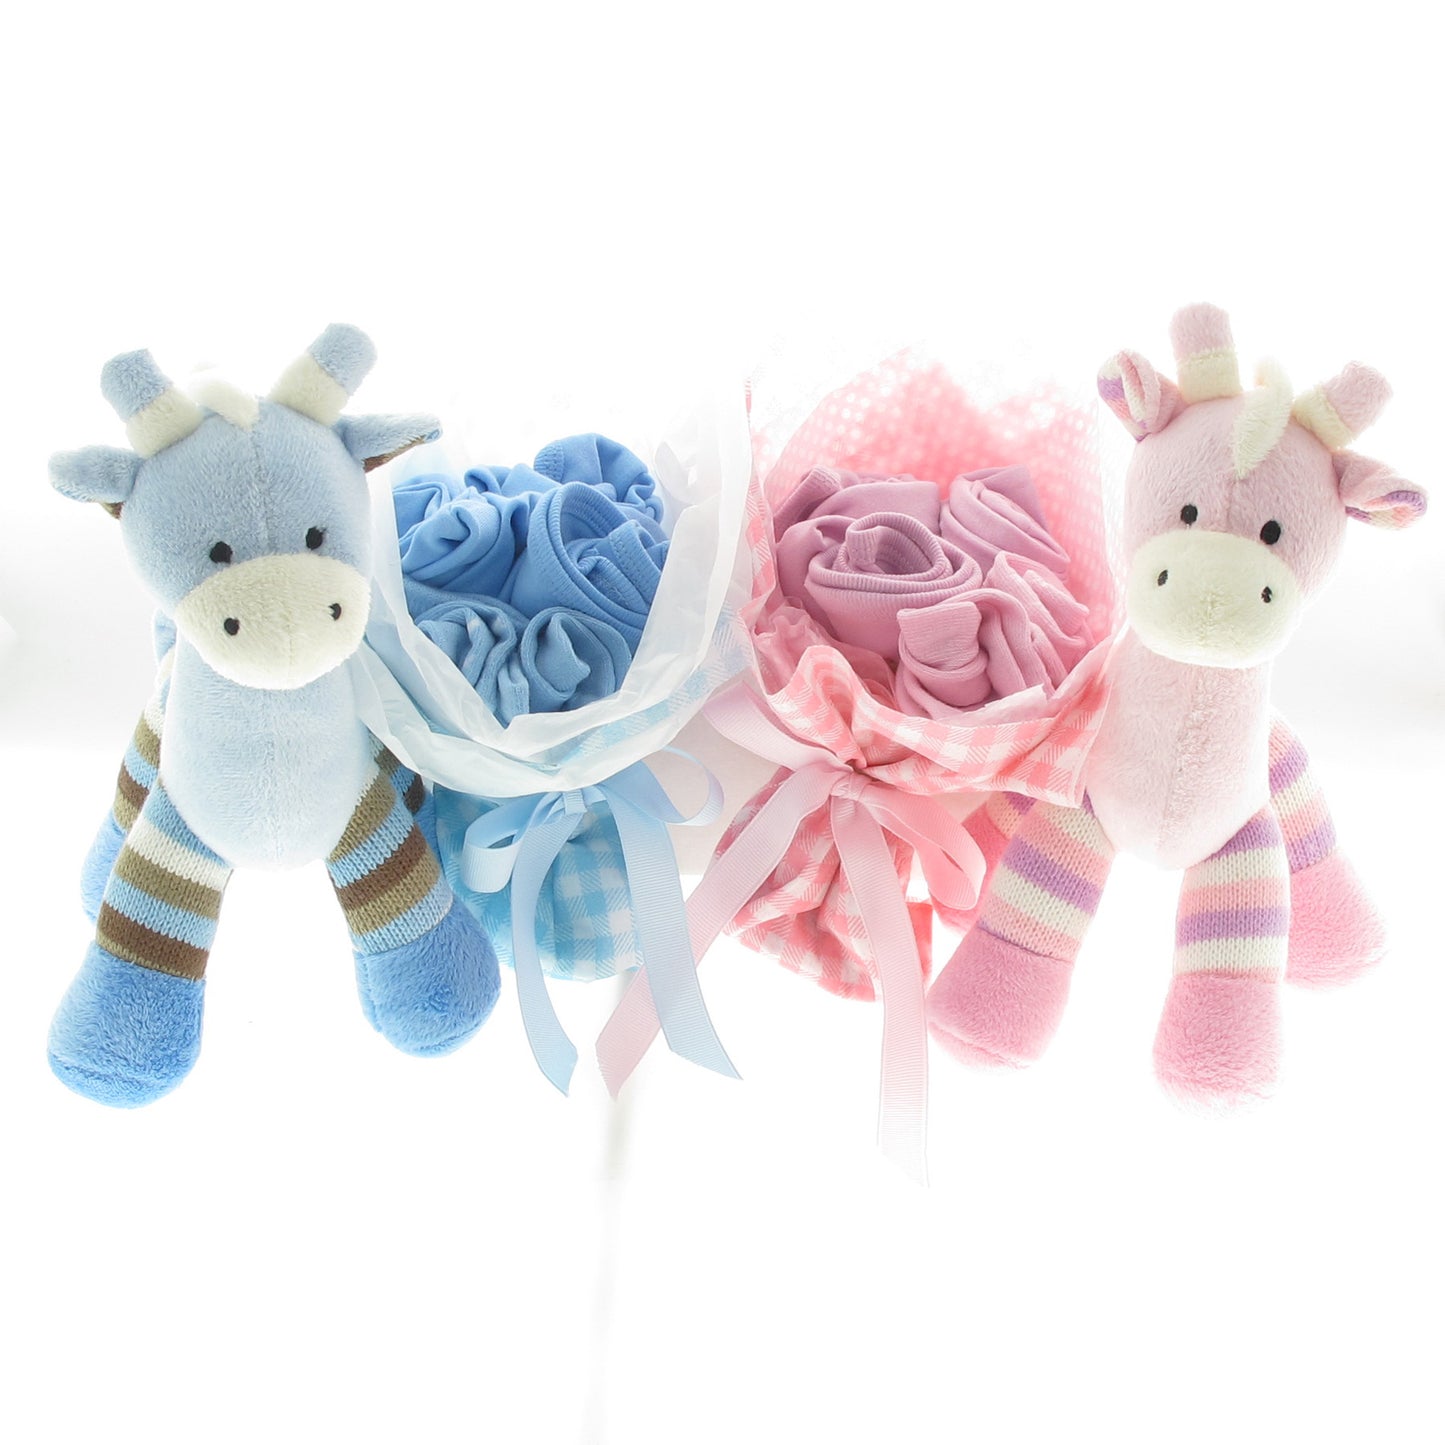 twins baby gift box giraffe baby rattles and baby clothing bouquets